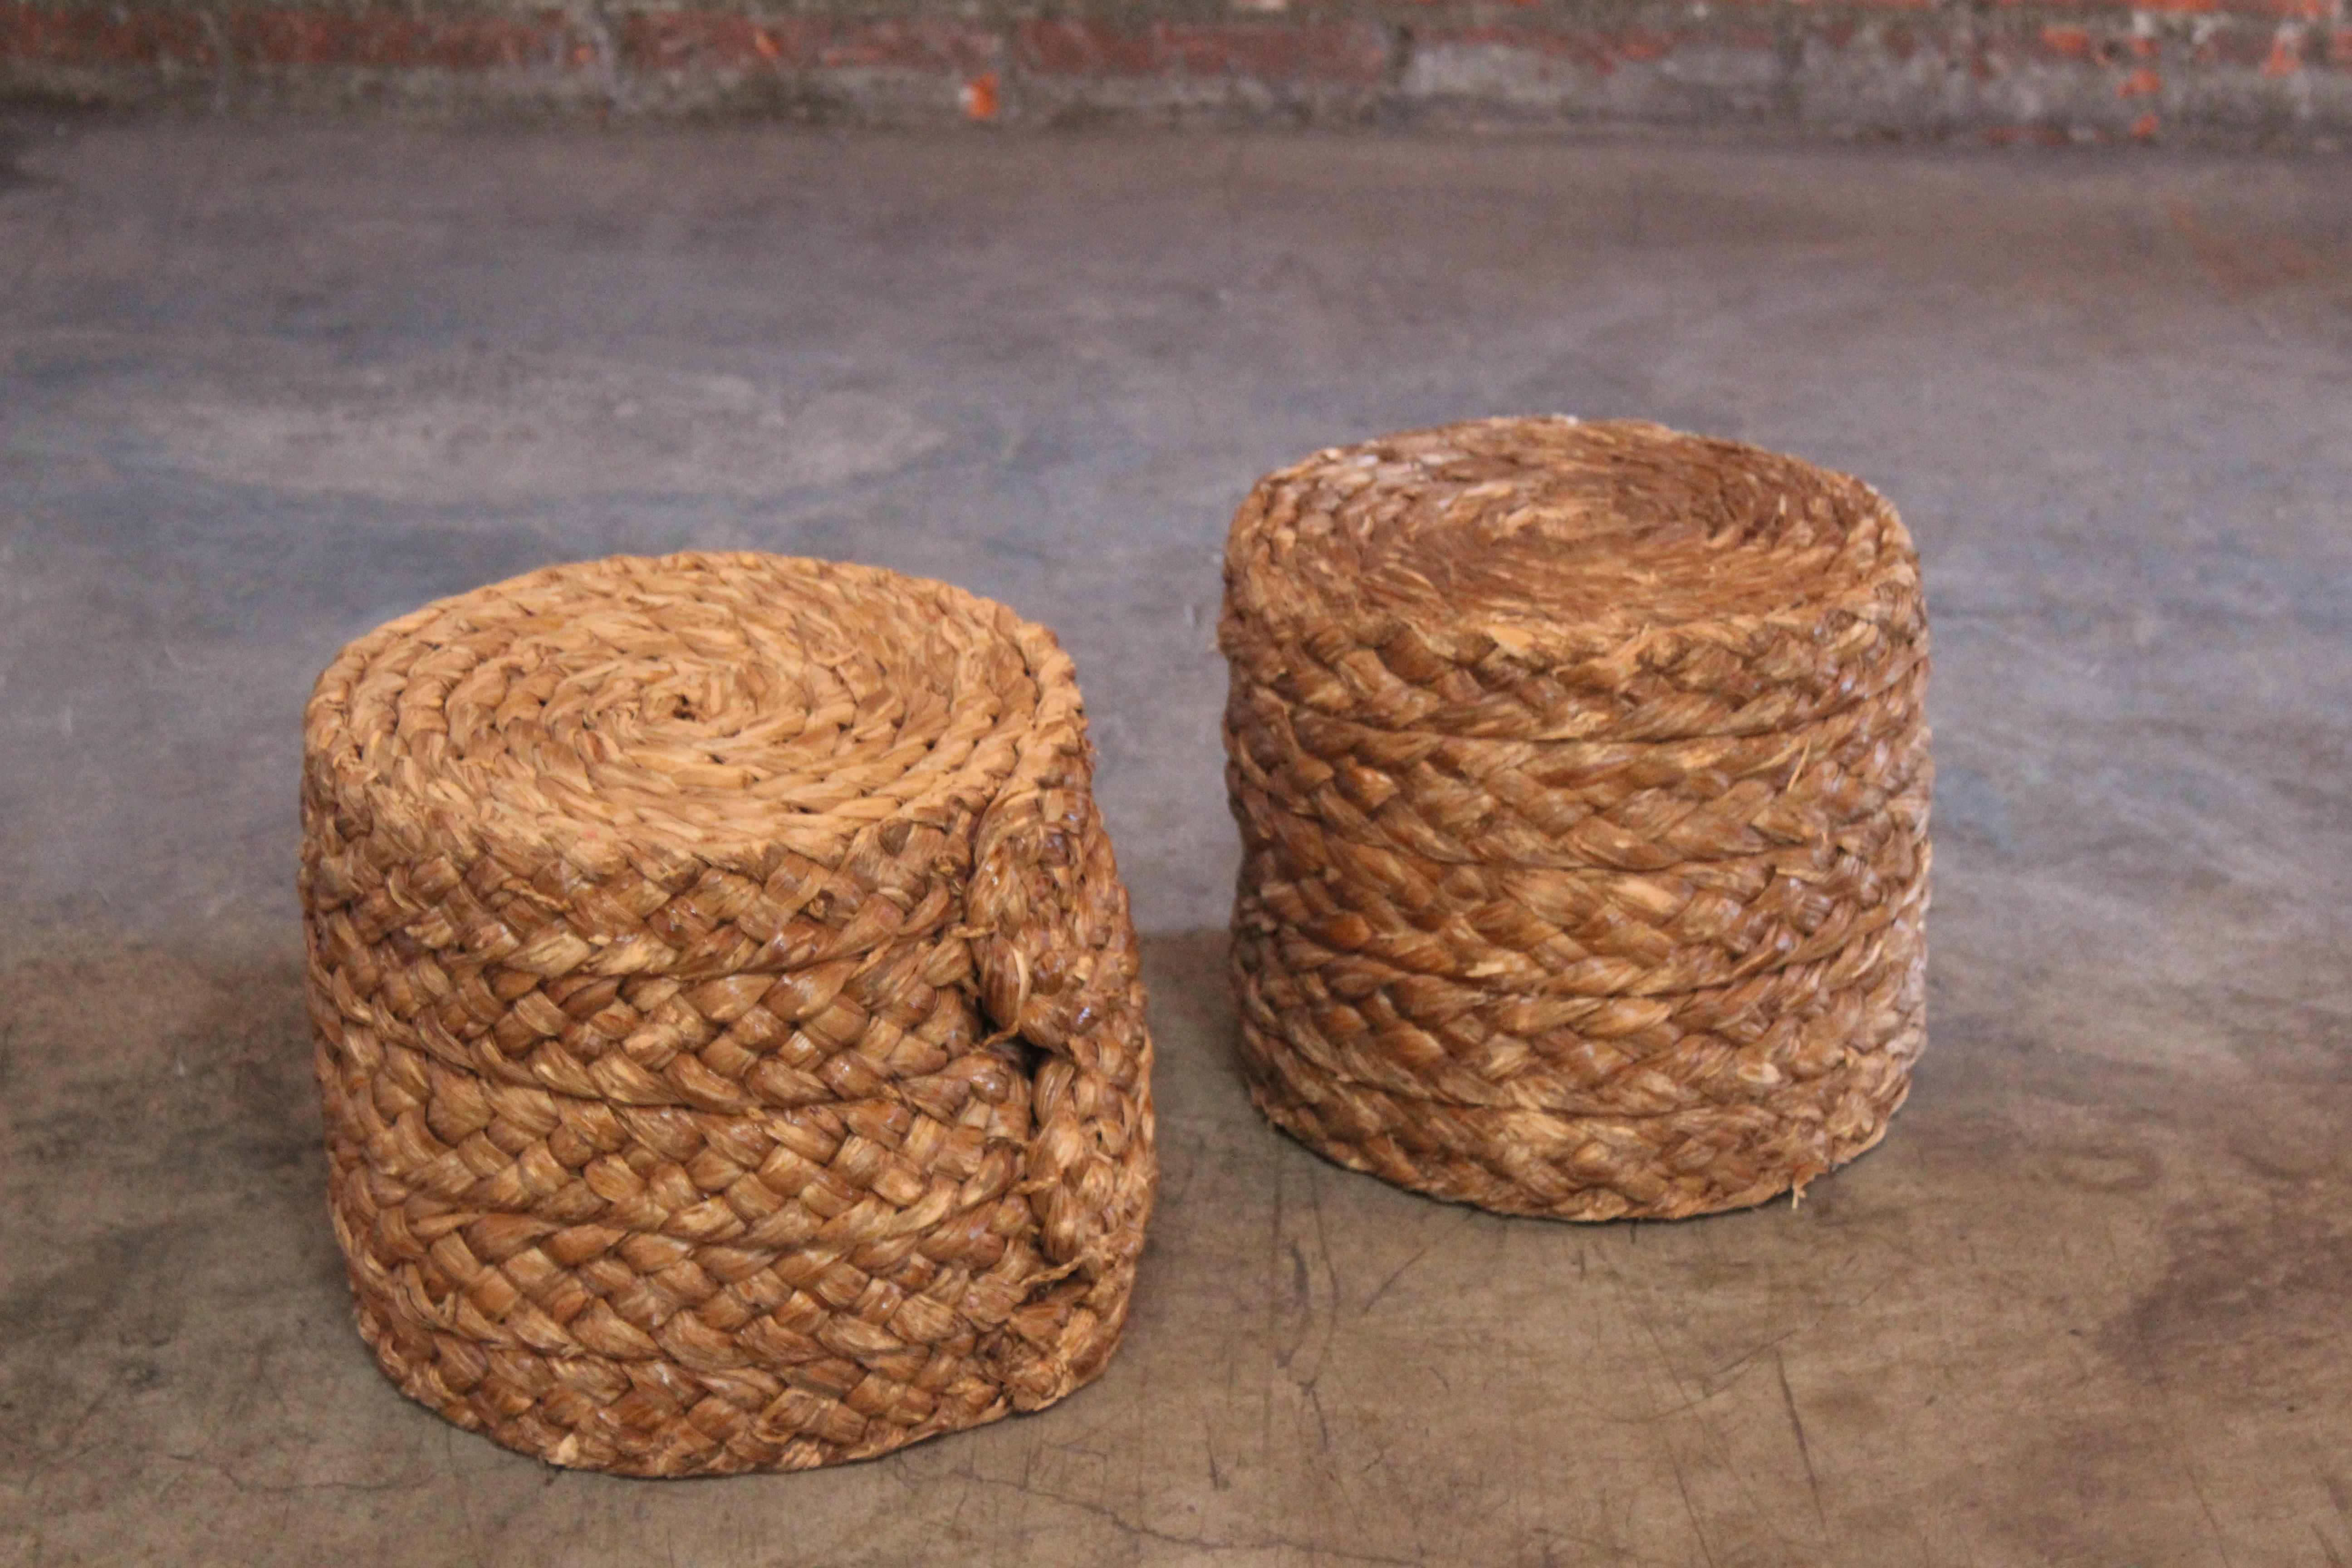 Pair of vintage rope stools by Audoux-Minex, France, 1950s. In good vintage condition with age appropriate wear.